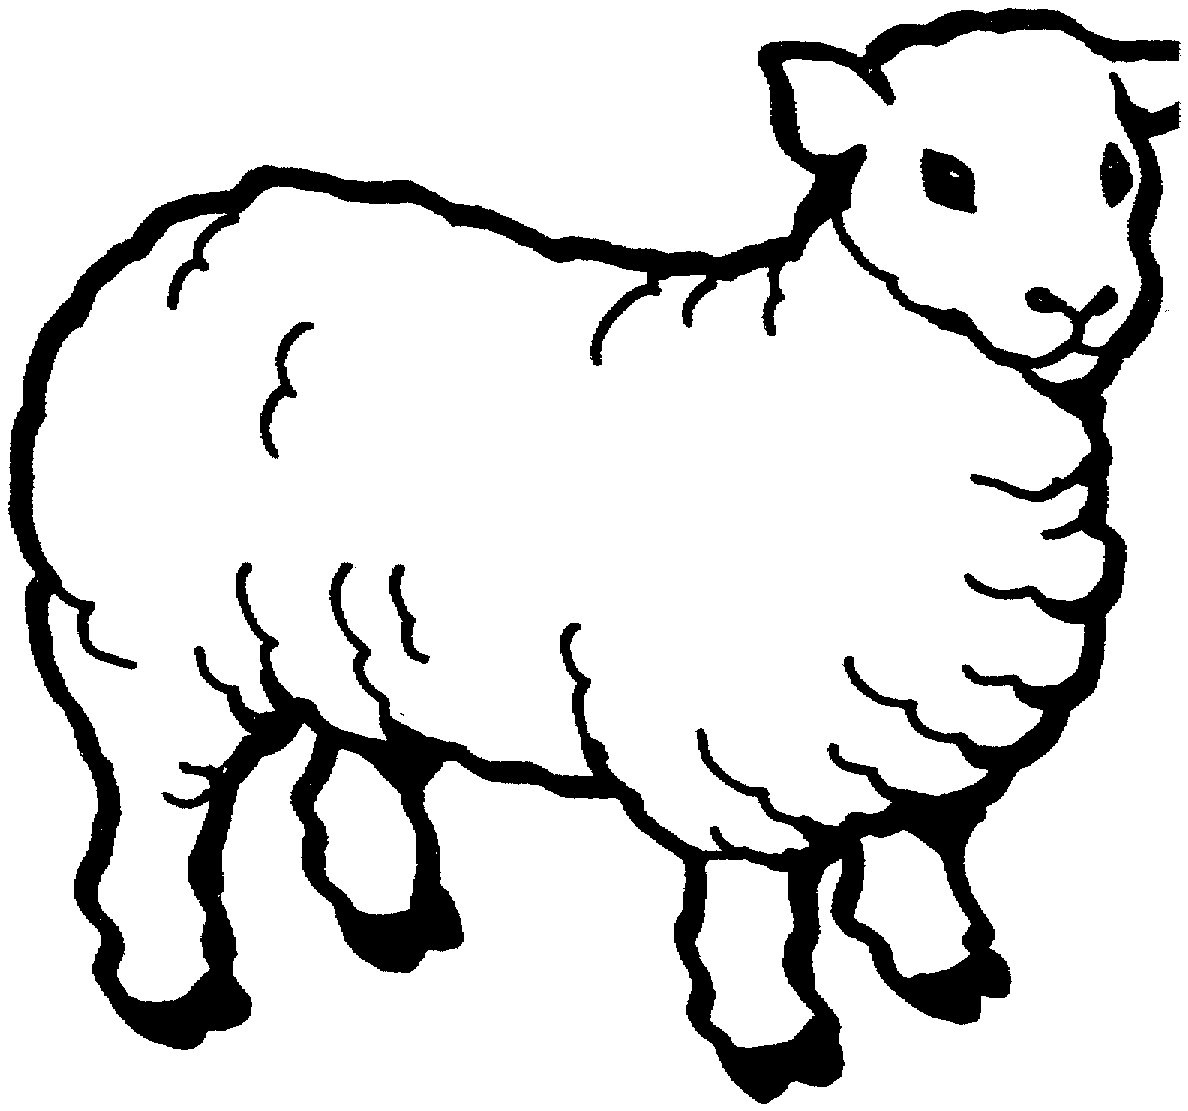 Sheep Drawings For Kids | Free Download Clip Art | Free Clip Art ...